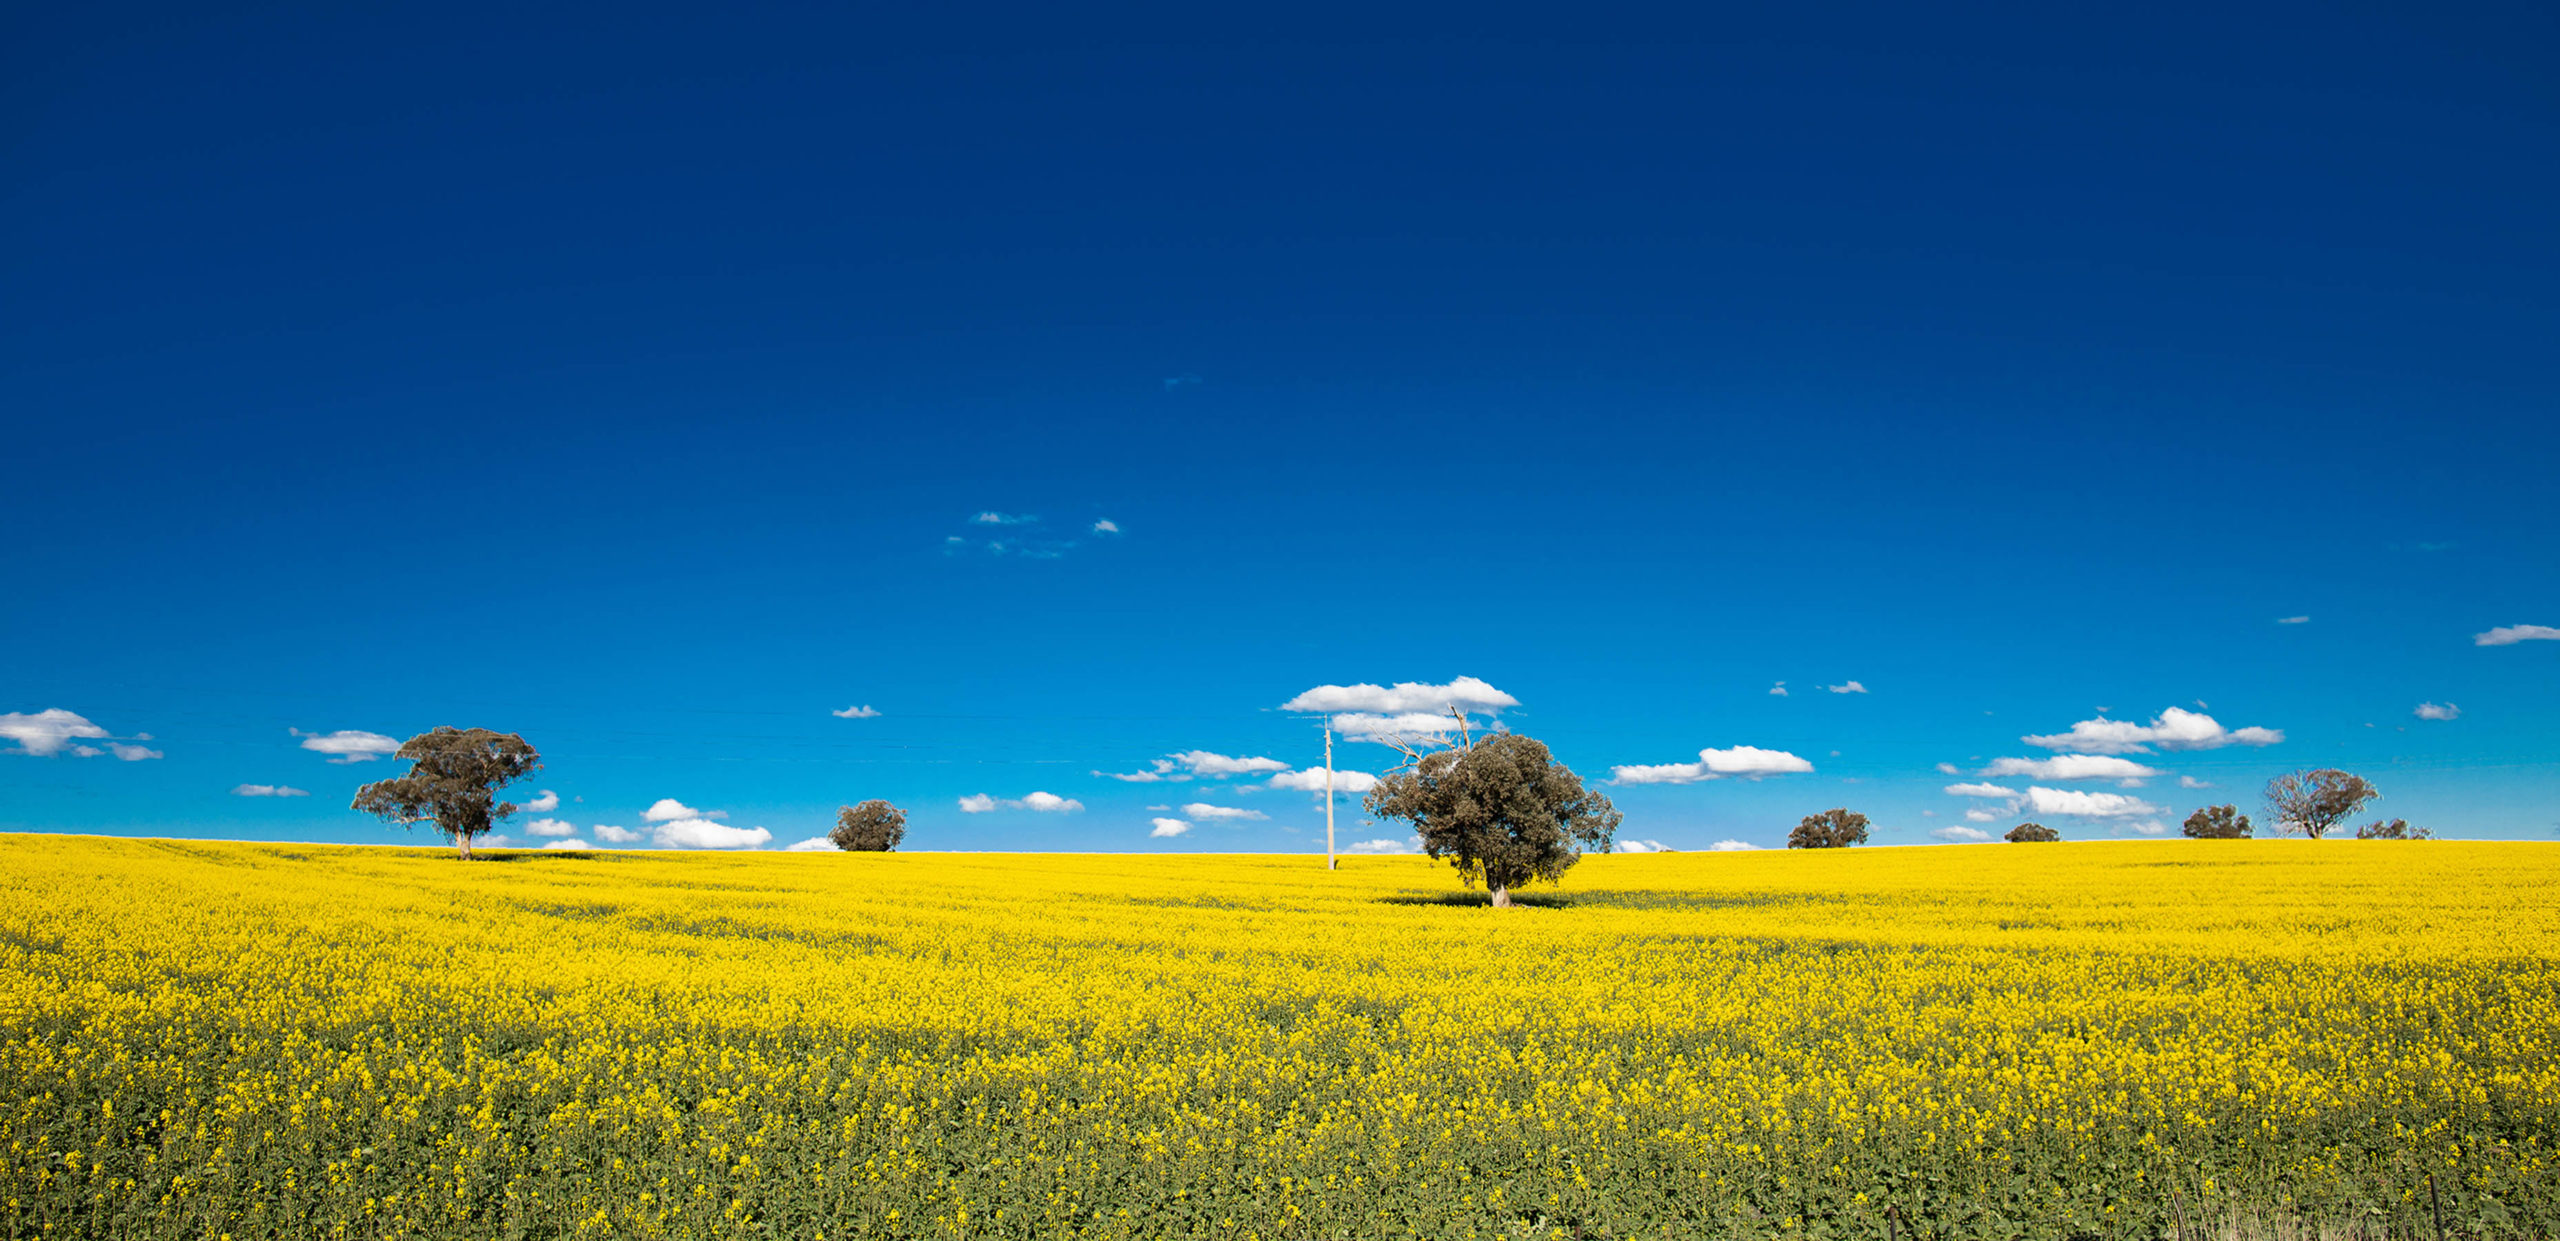 Canola fields outside of Junee towards Wagga Wagga, New South Wales.